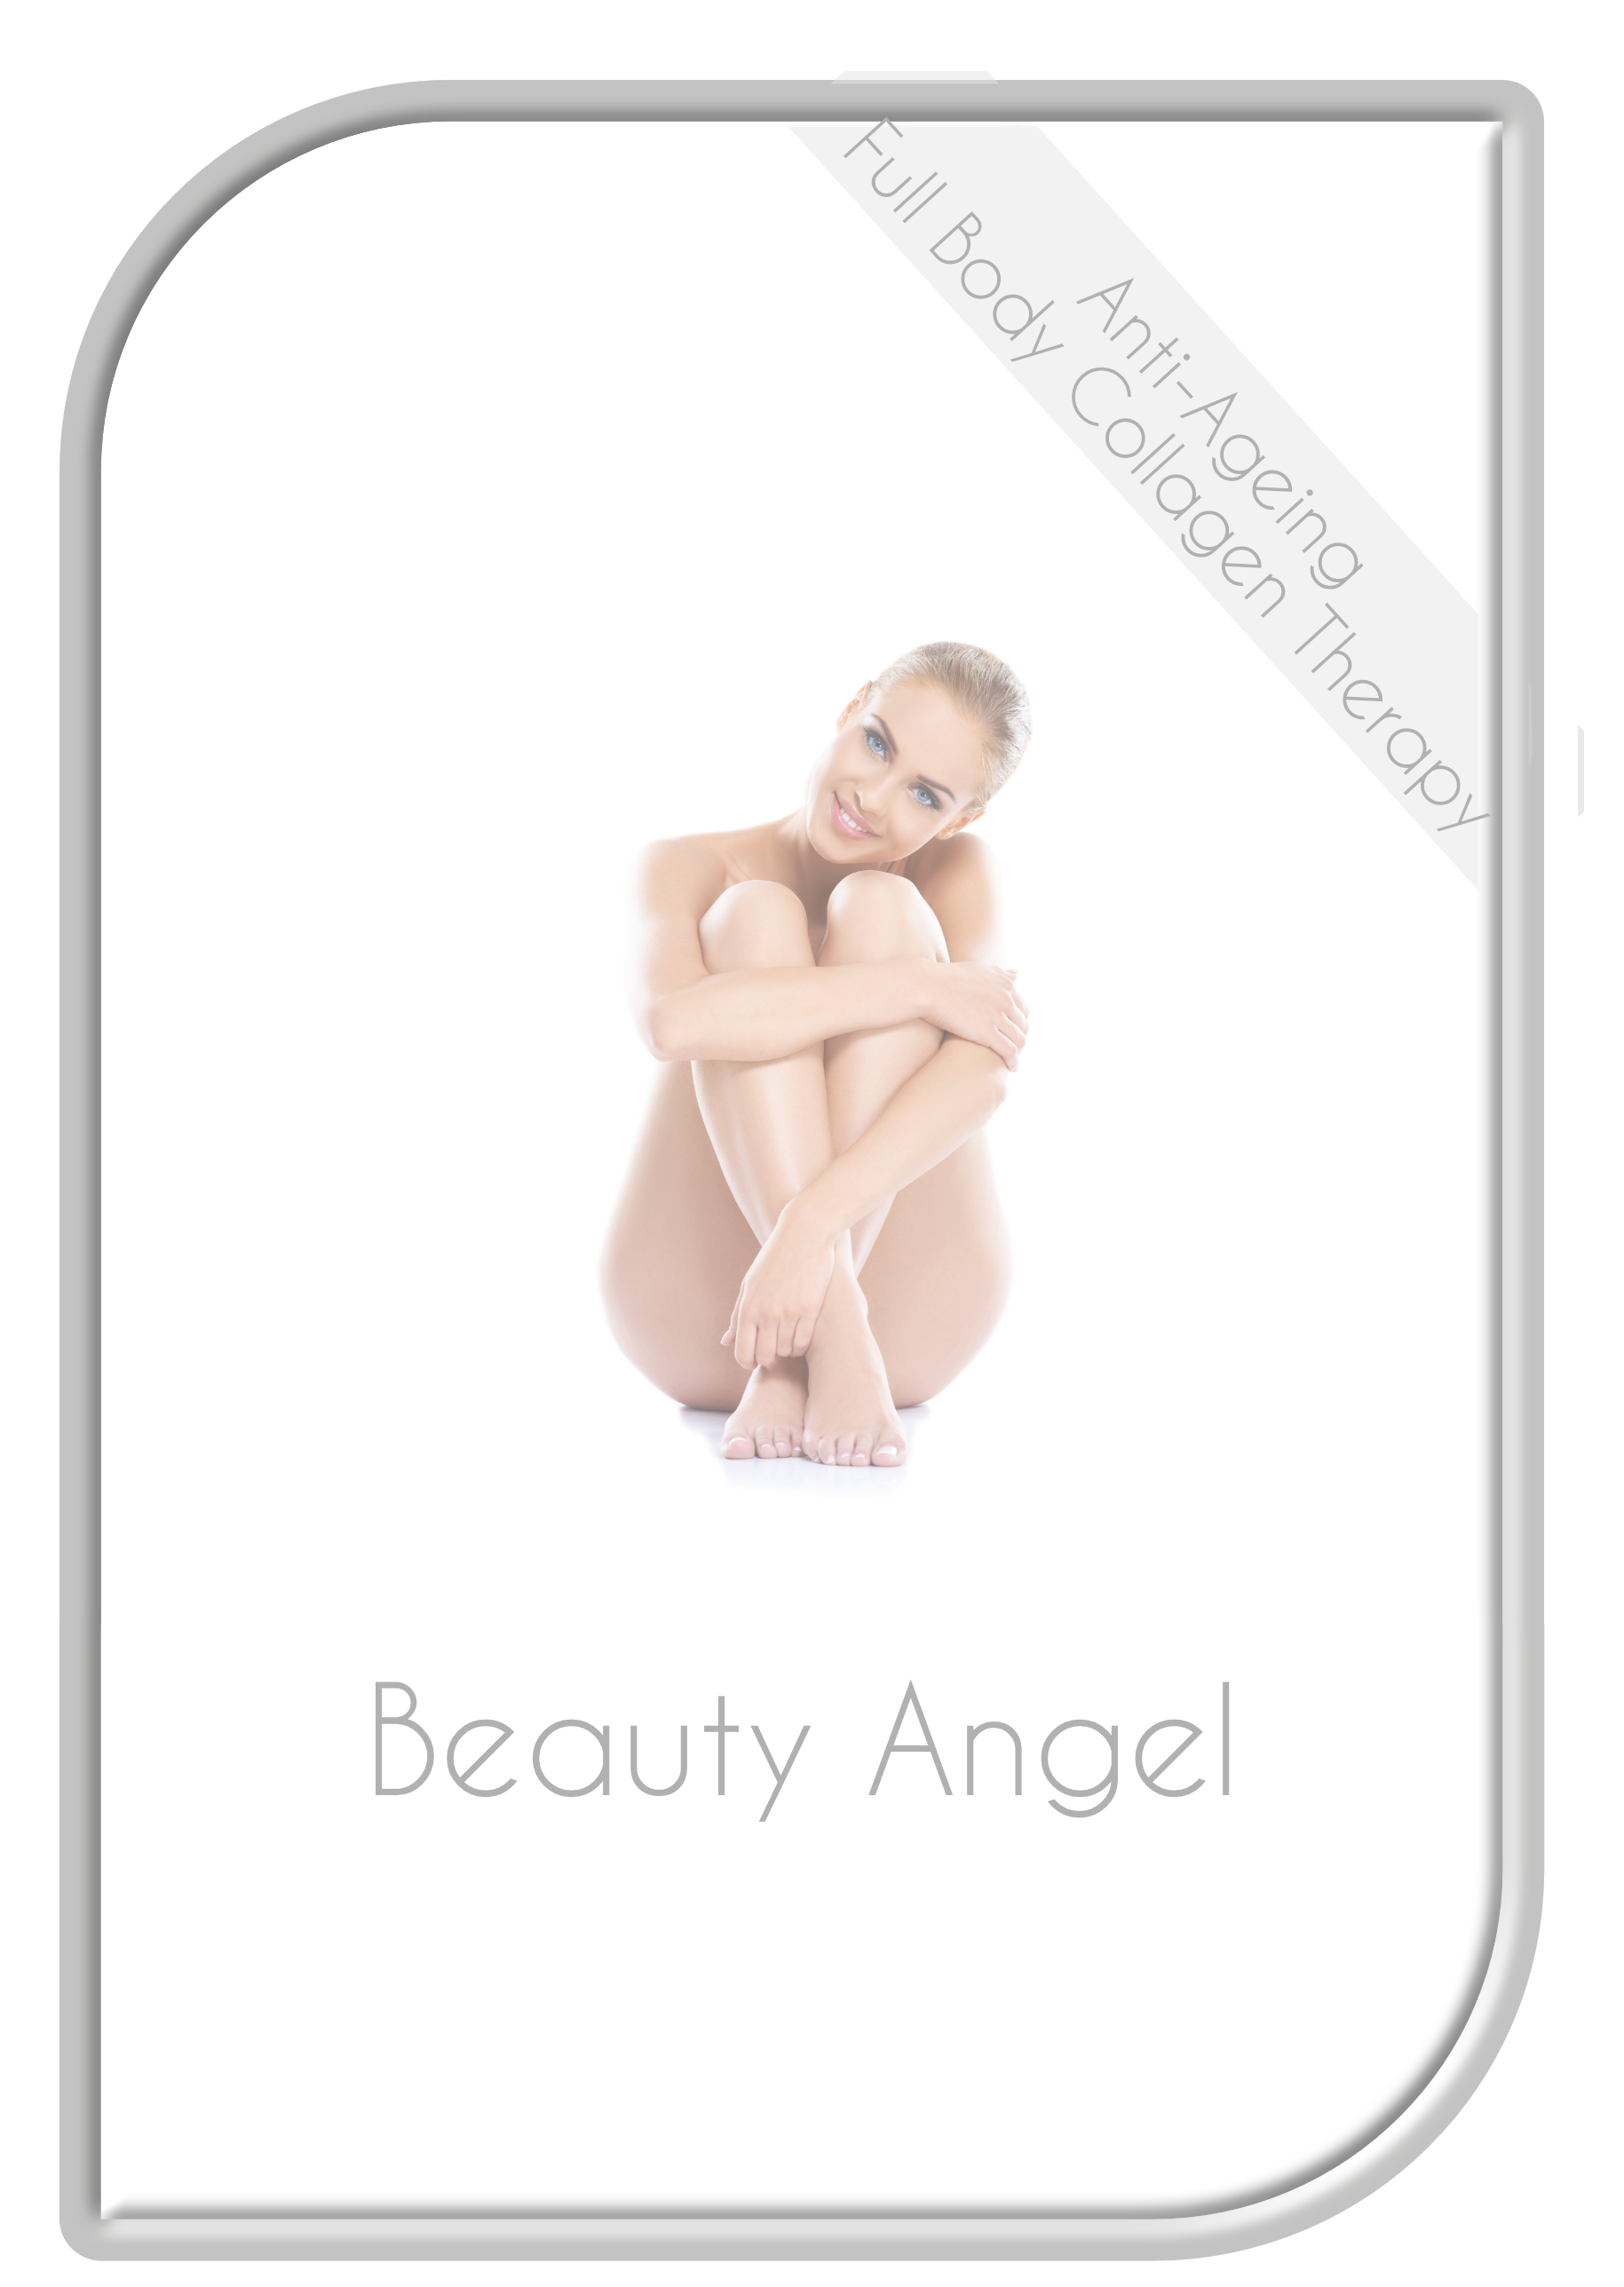 Beauty Angel® Collagen Light Therapy